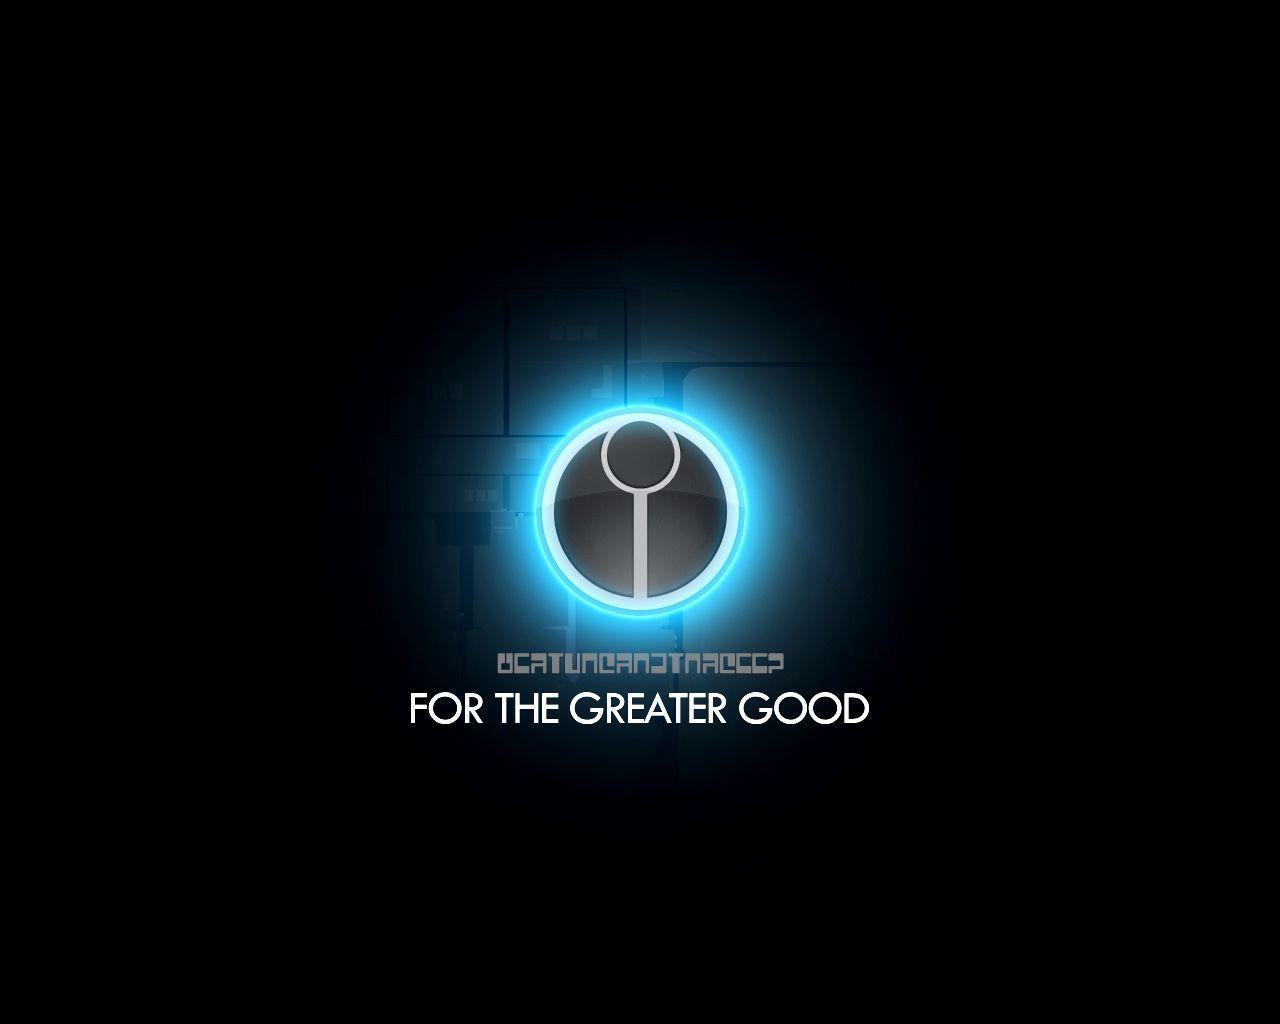 Tau For The Greater Good Wallpapers 1280x1024 px Free Download.